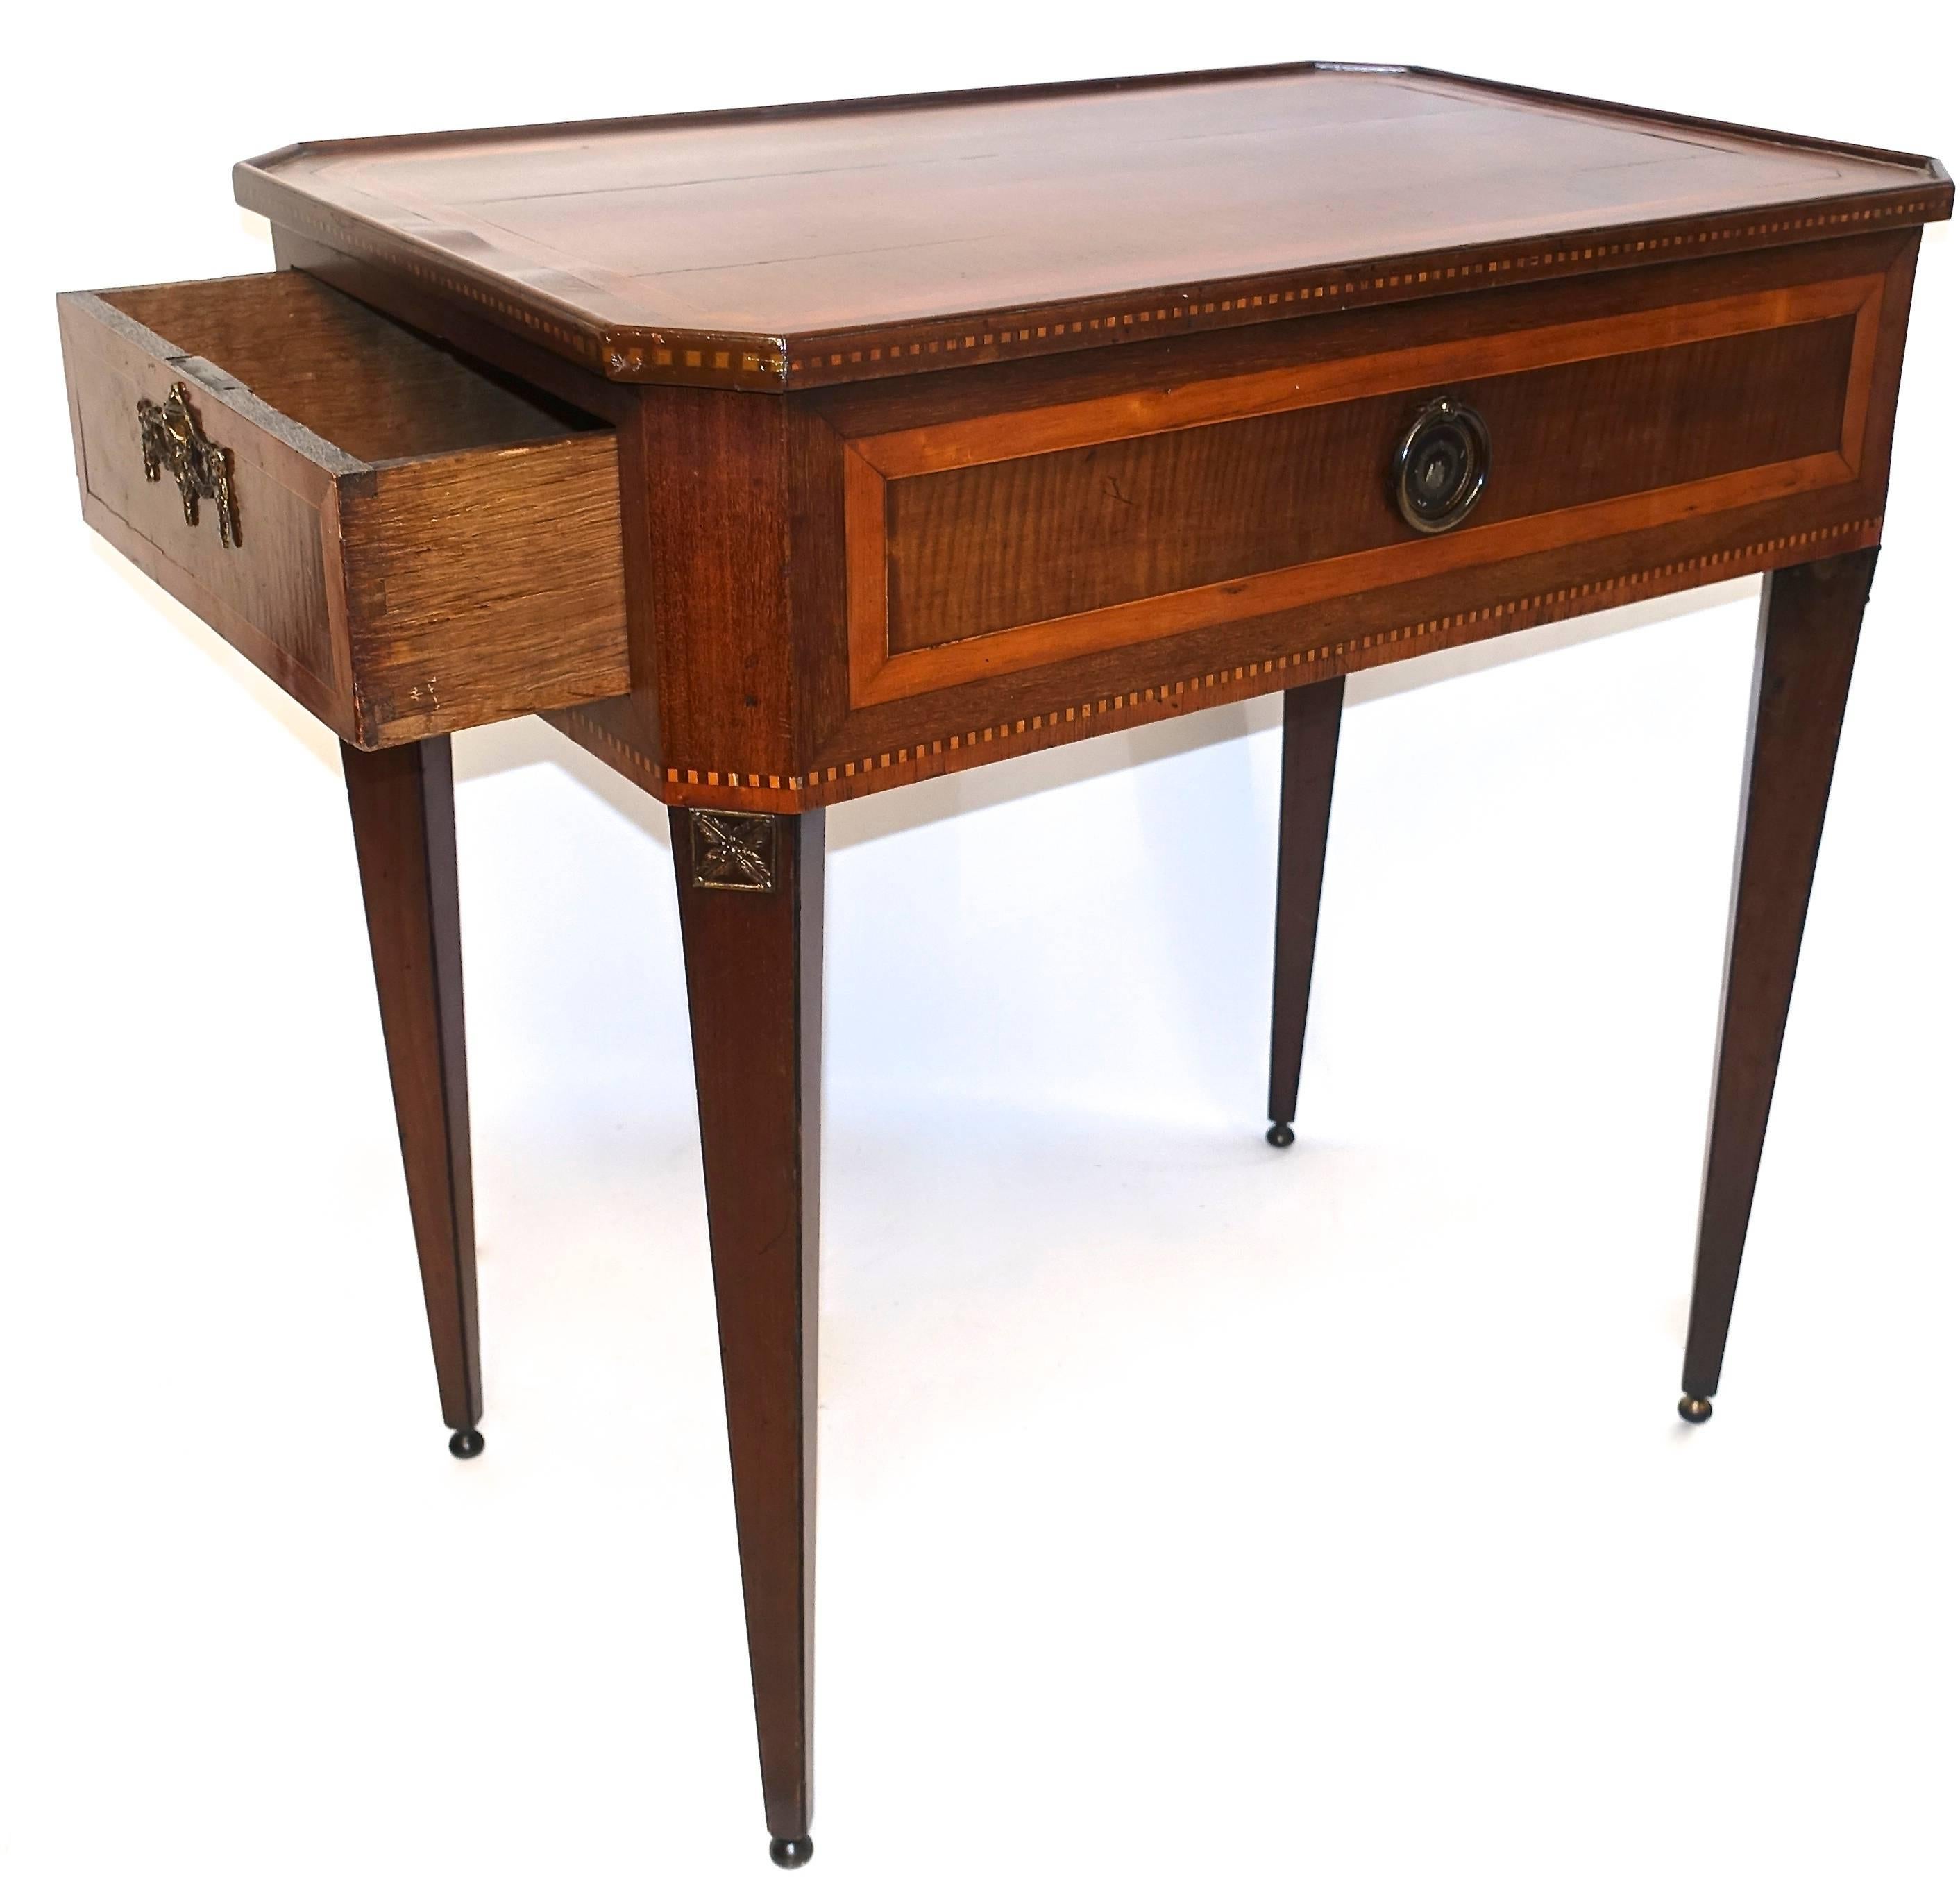 Neoclassical mahogany centre or tea table with single drawer at one end. Satinwood inlay on the top and as a dental detail around the top and base of the body. Decorative Brass pulls on either side and a decorative brass fillet at the top of each